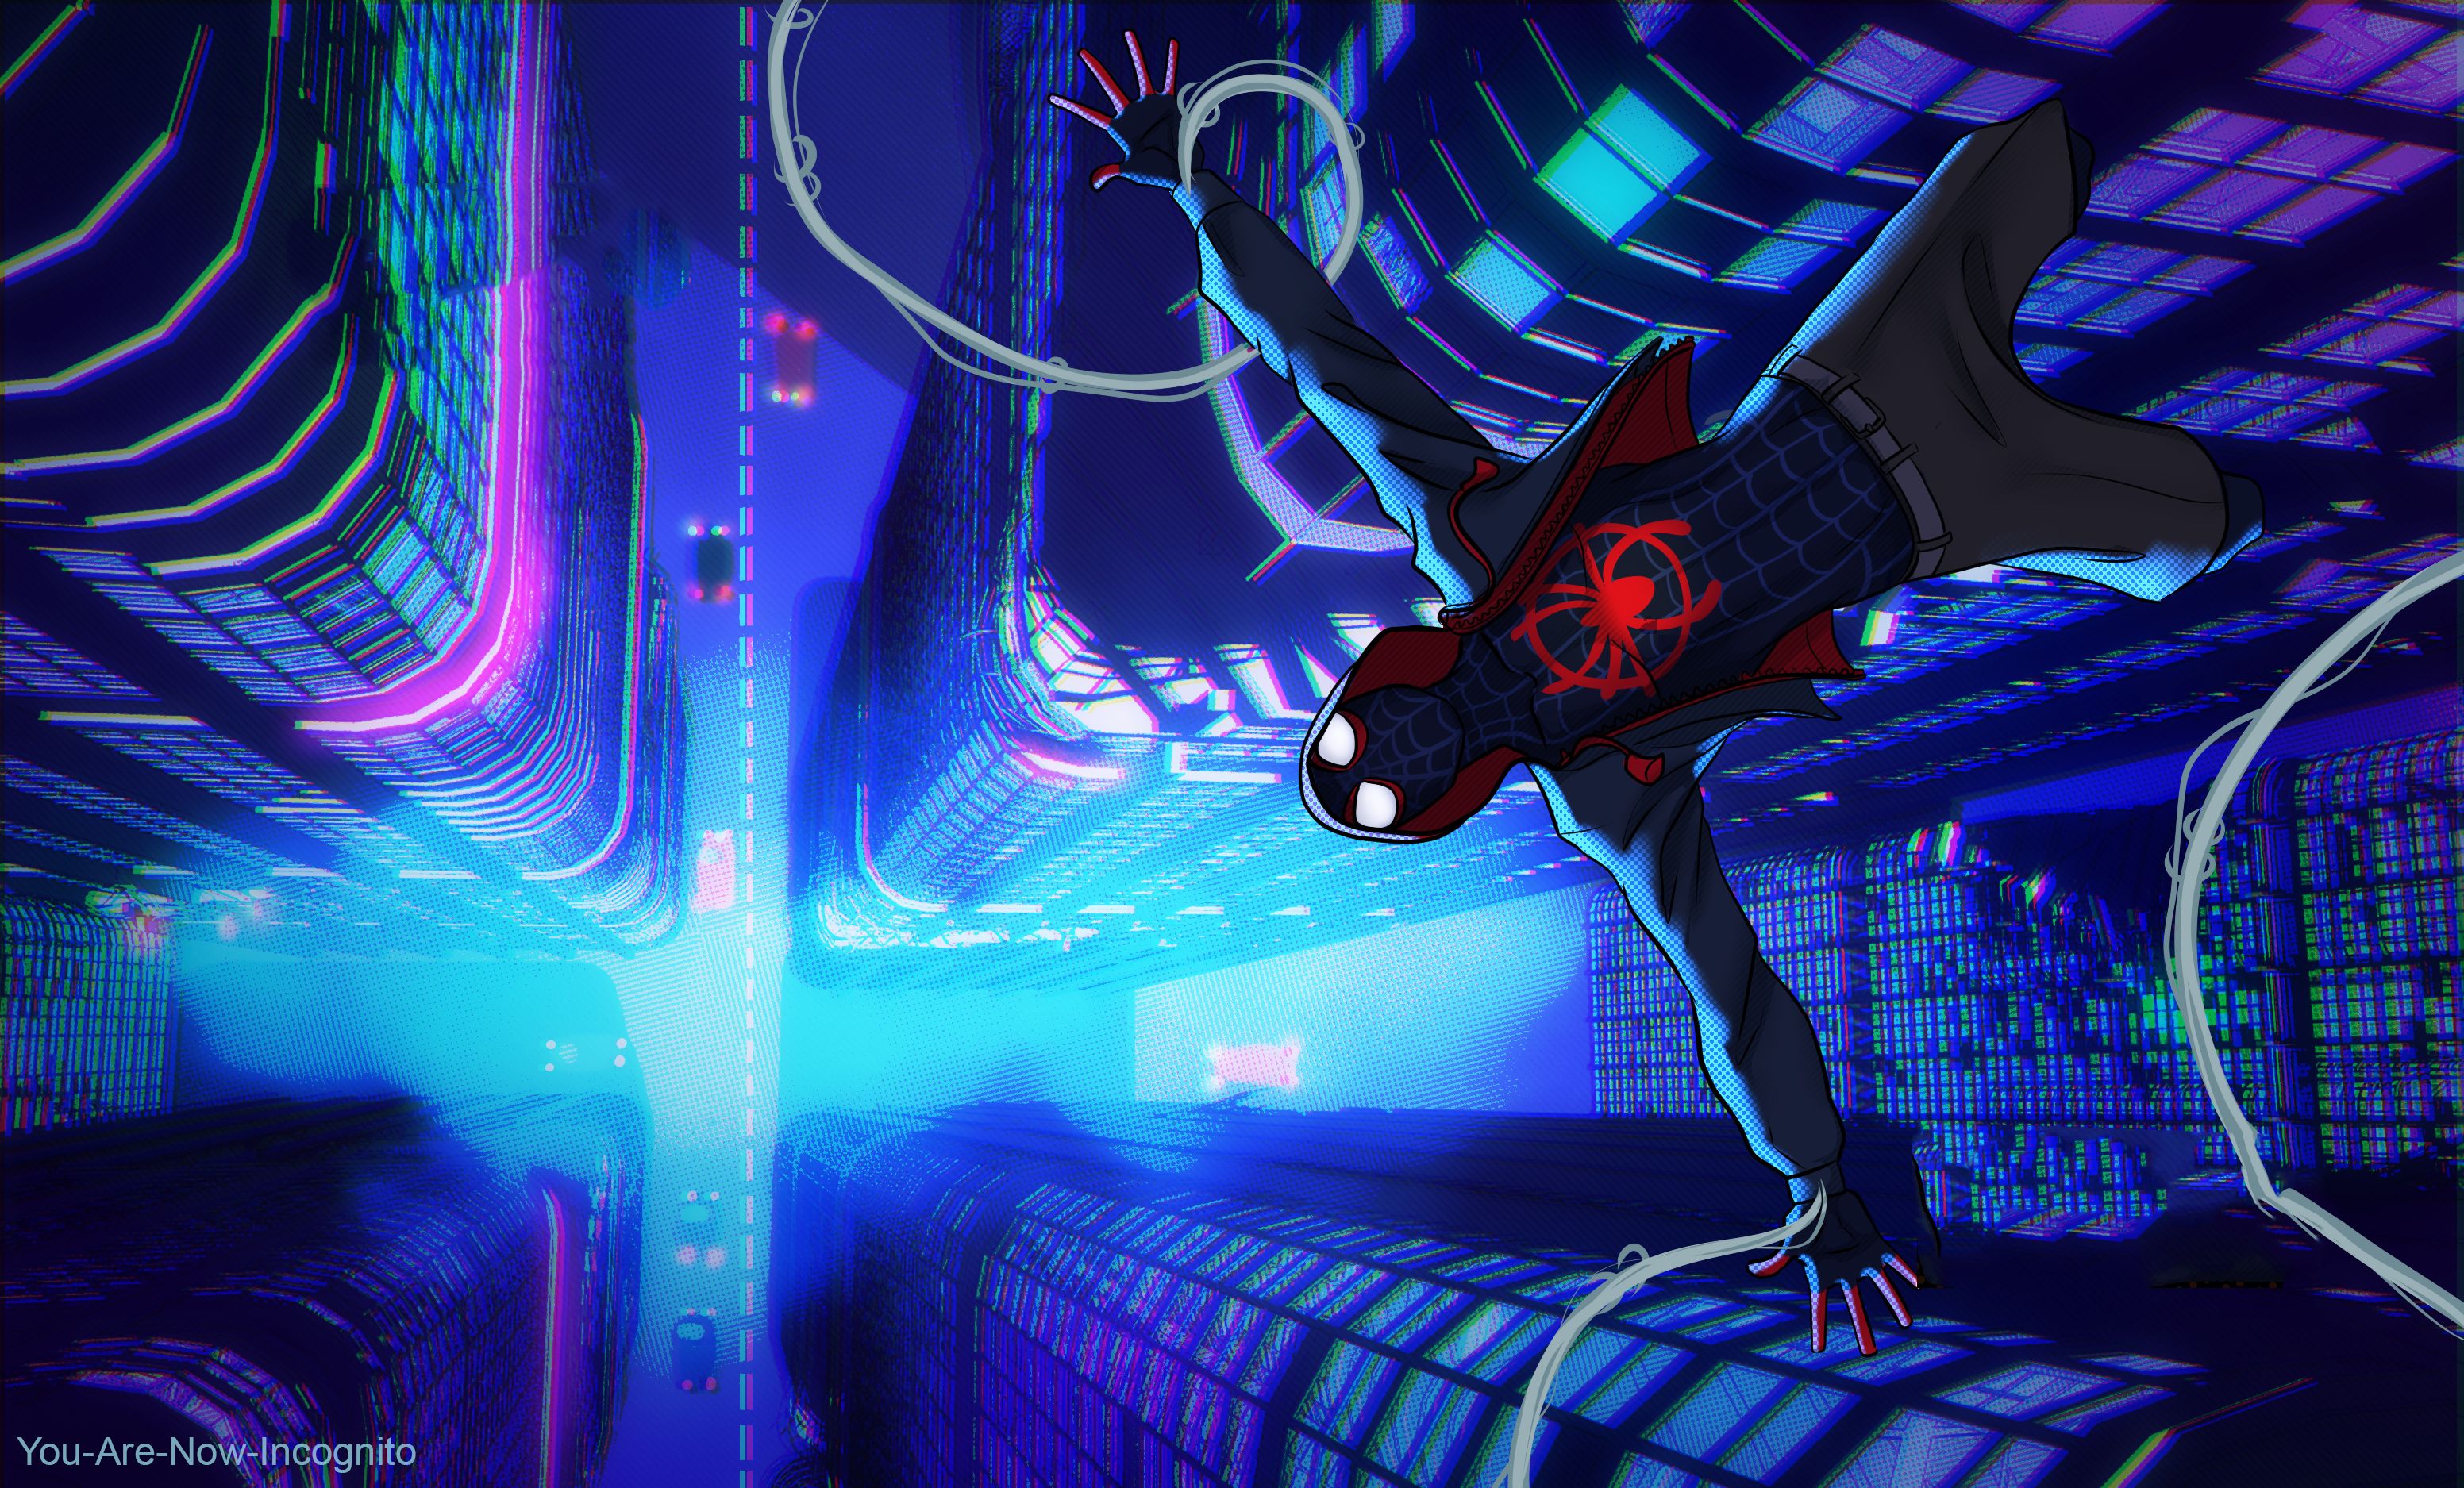 1407018 spider man miles morales, games, 2021 games, ps5 games, ps games,  spiderman, marvel, hd, 4k - Rare Gallery HD Wallpapers